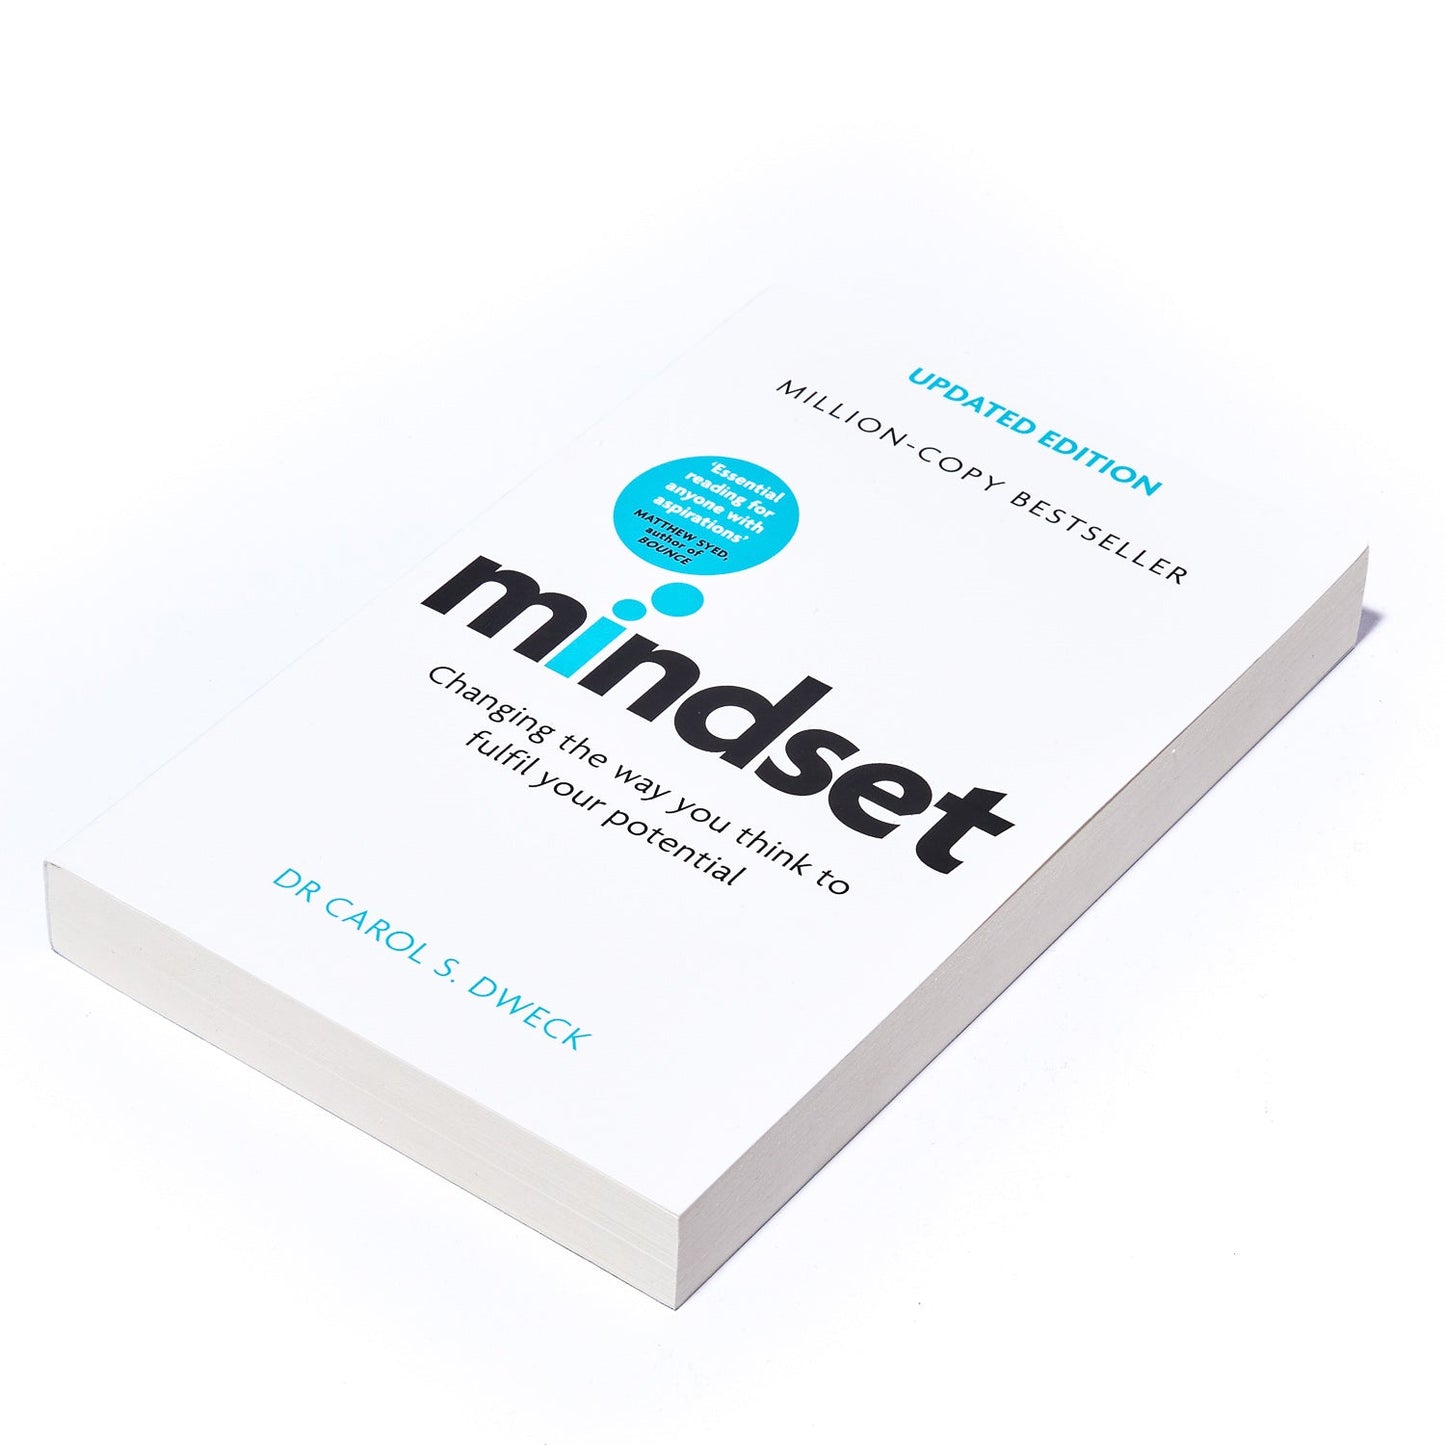 MINDSET UPDATED EDITION: CHANGING THE WAY YOU THINK TO FULFIL YOUR POTENTIAL